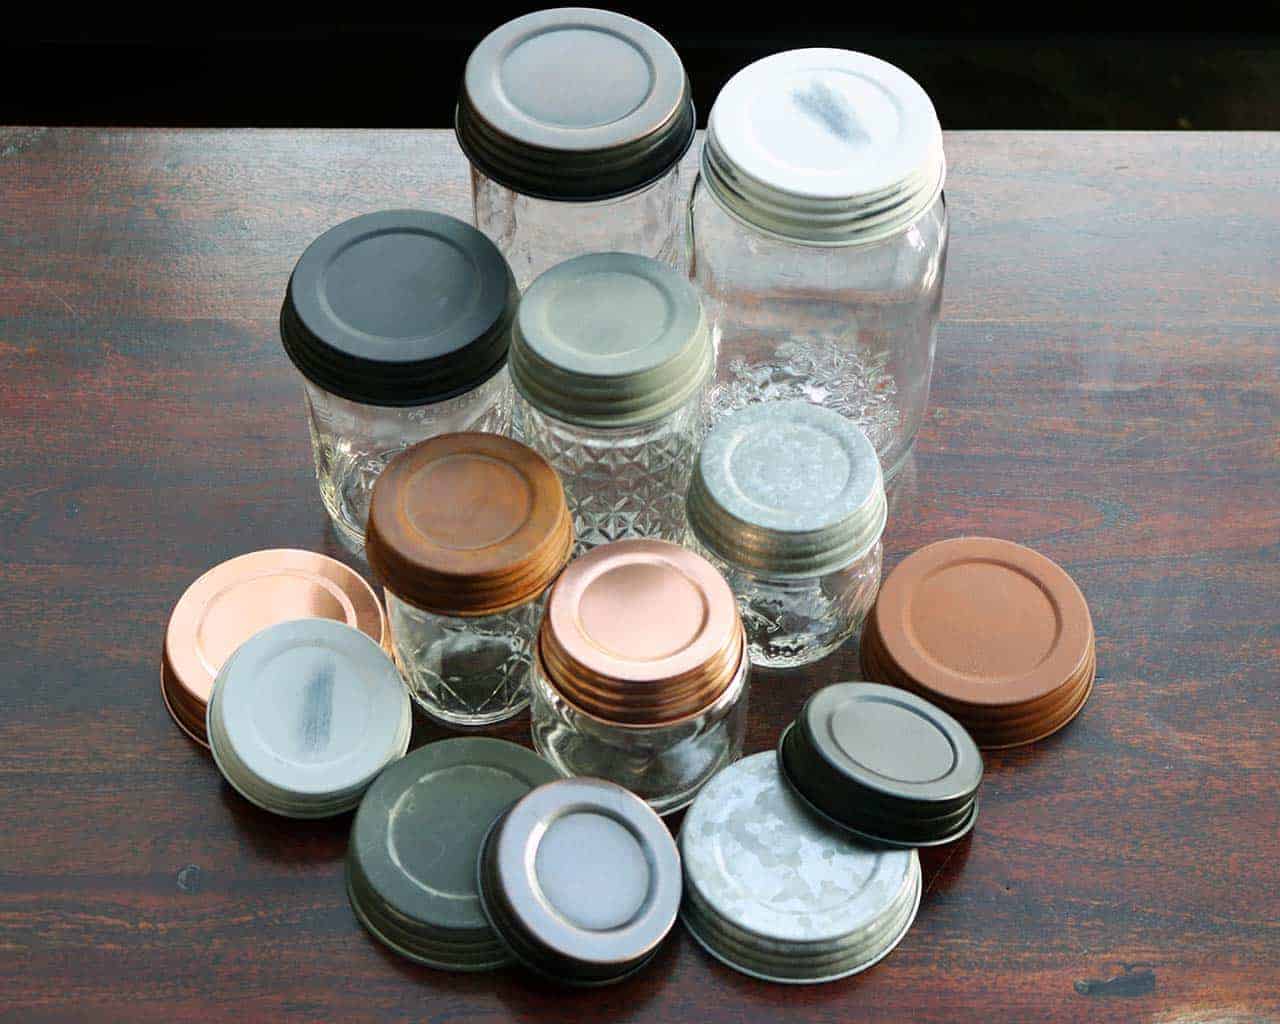 Seven types of decorative Mason jar lids in regular and wide mouth